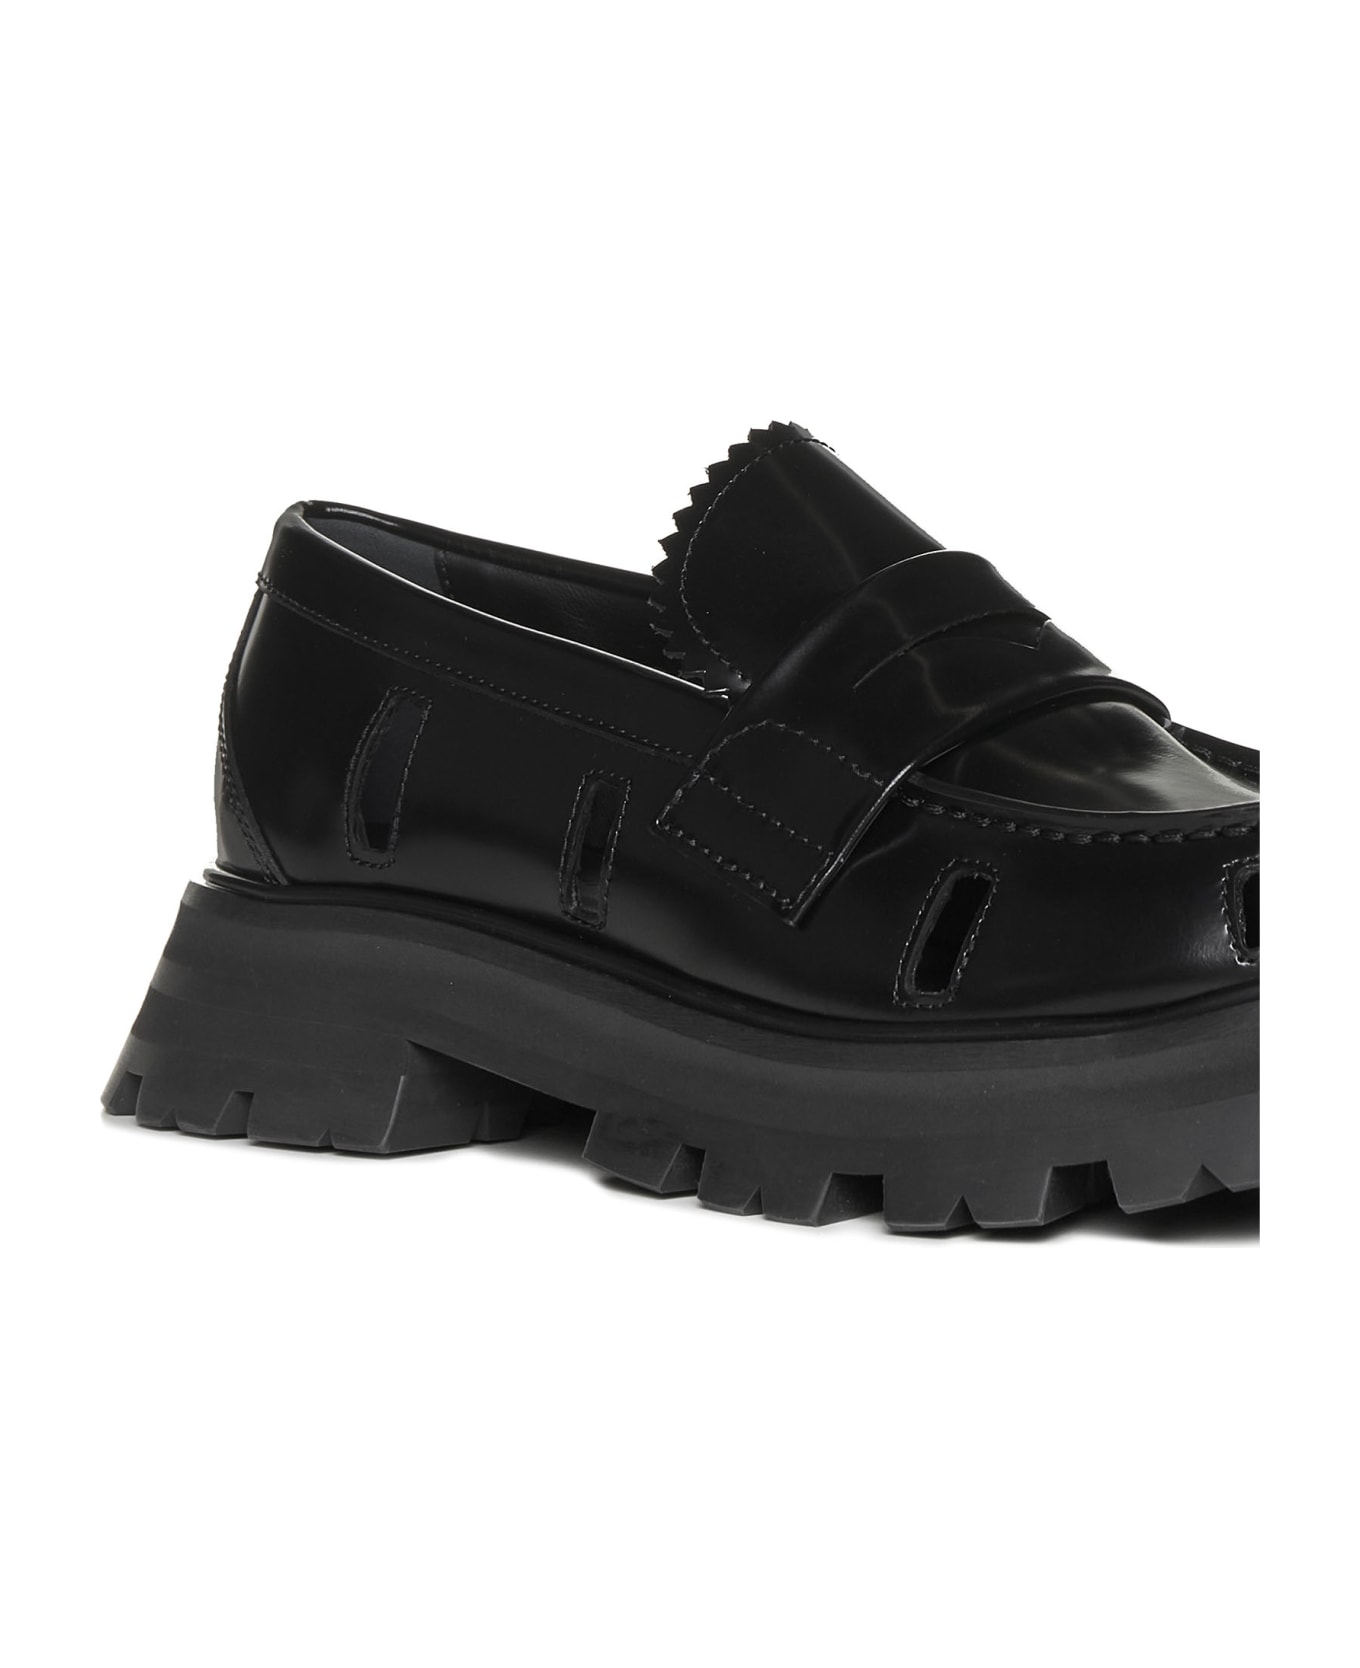 Alexander McQueen Cut-out Loafers - Black